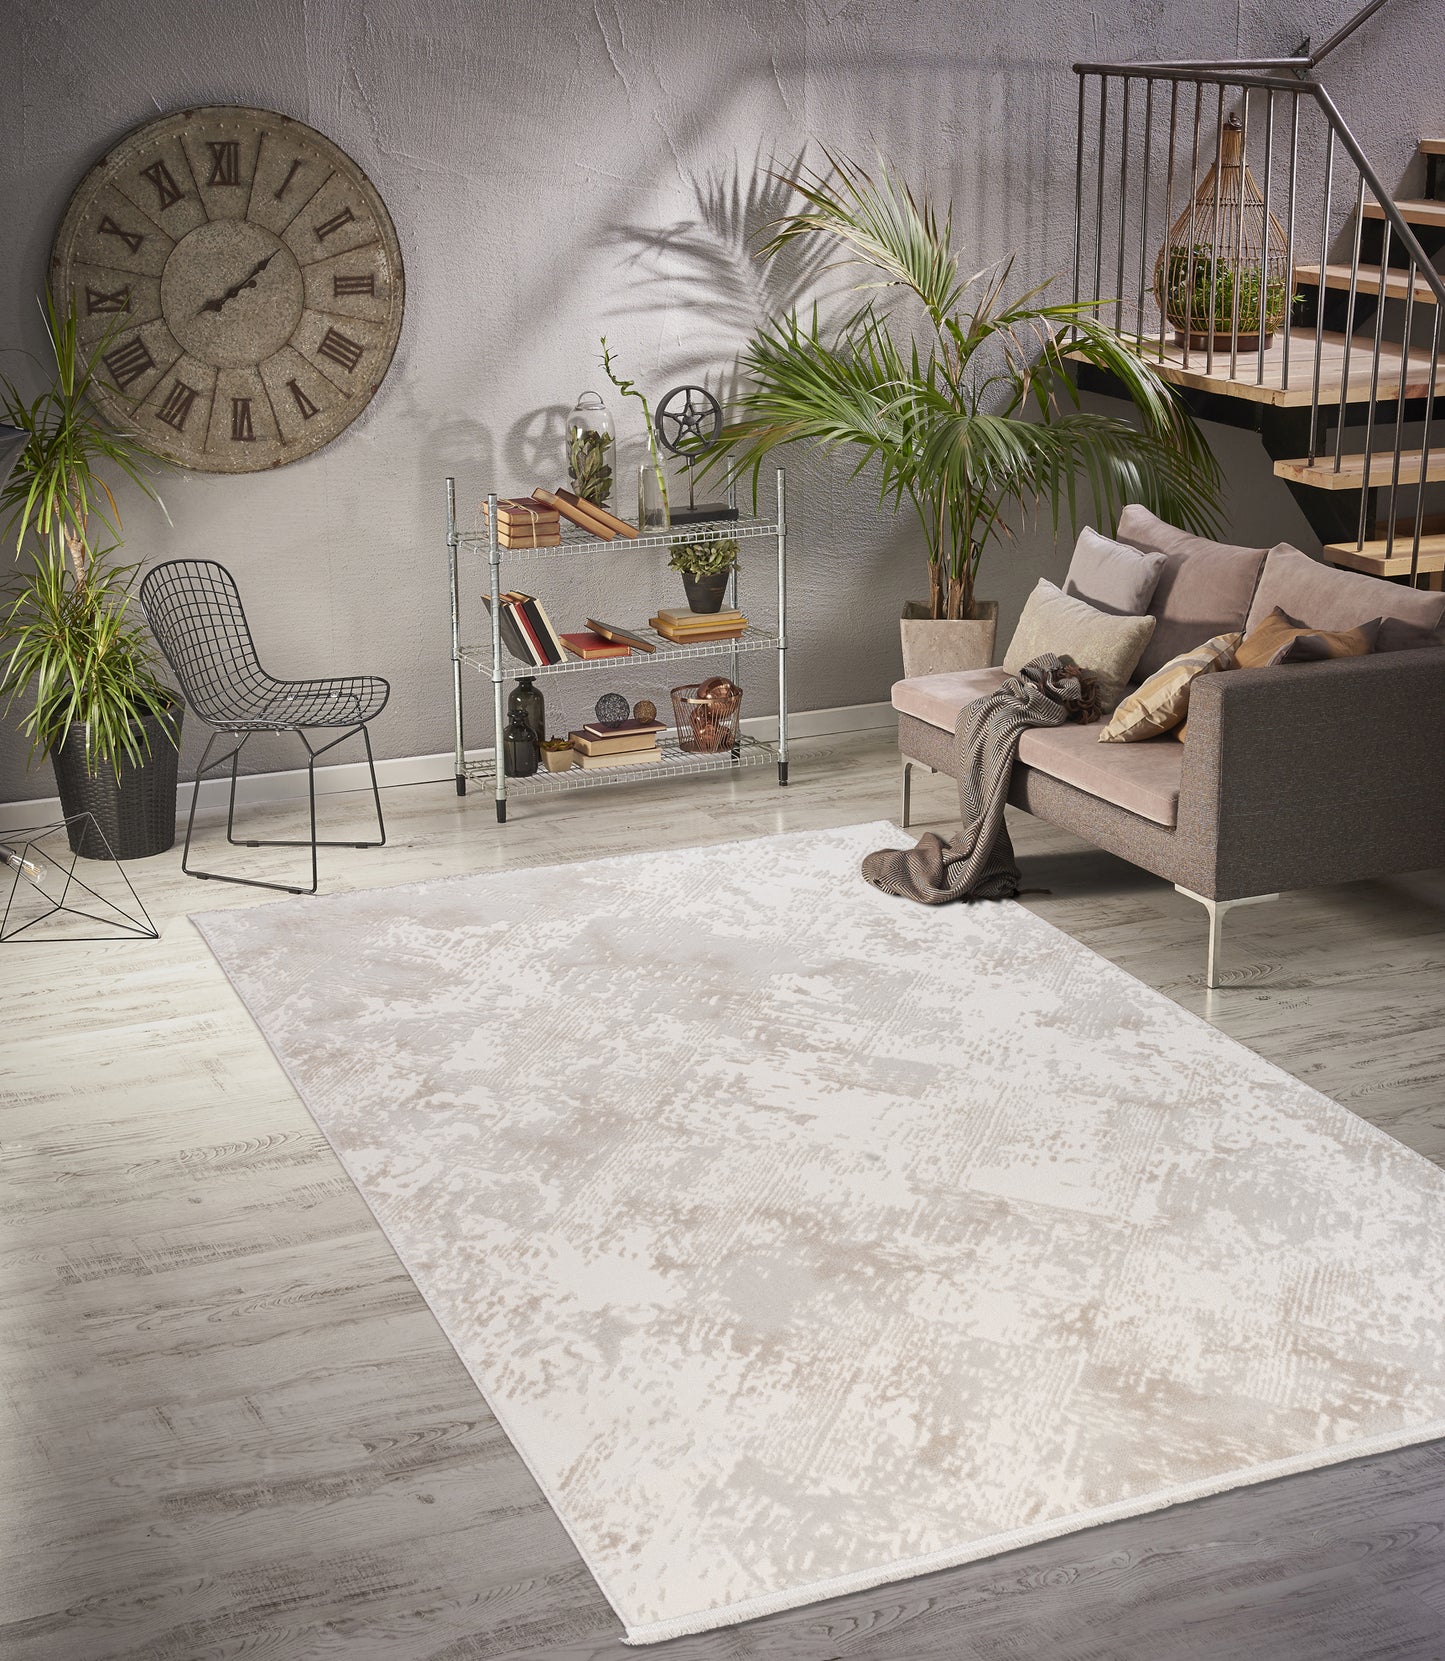 ladole rugs abstract pattern home decor indoor area rug premium carpet for living room bedroom dining room kitchen and office cream 4x6, 4x5 ft Small Carpet, Home Office, Living Room, Bedroom